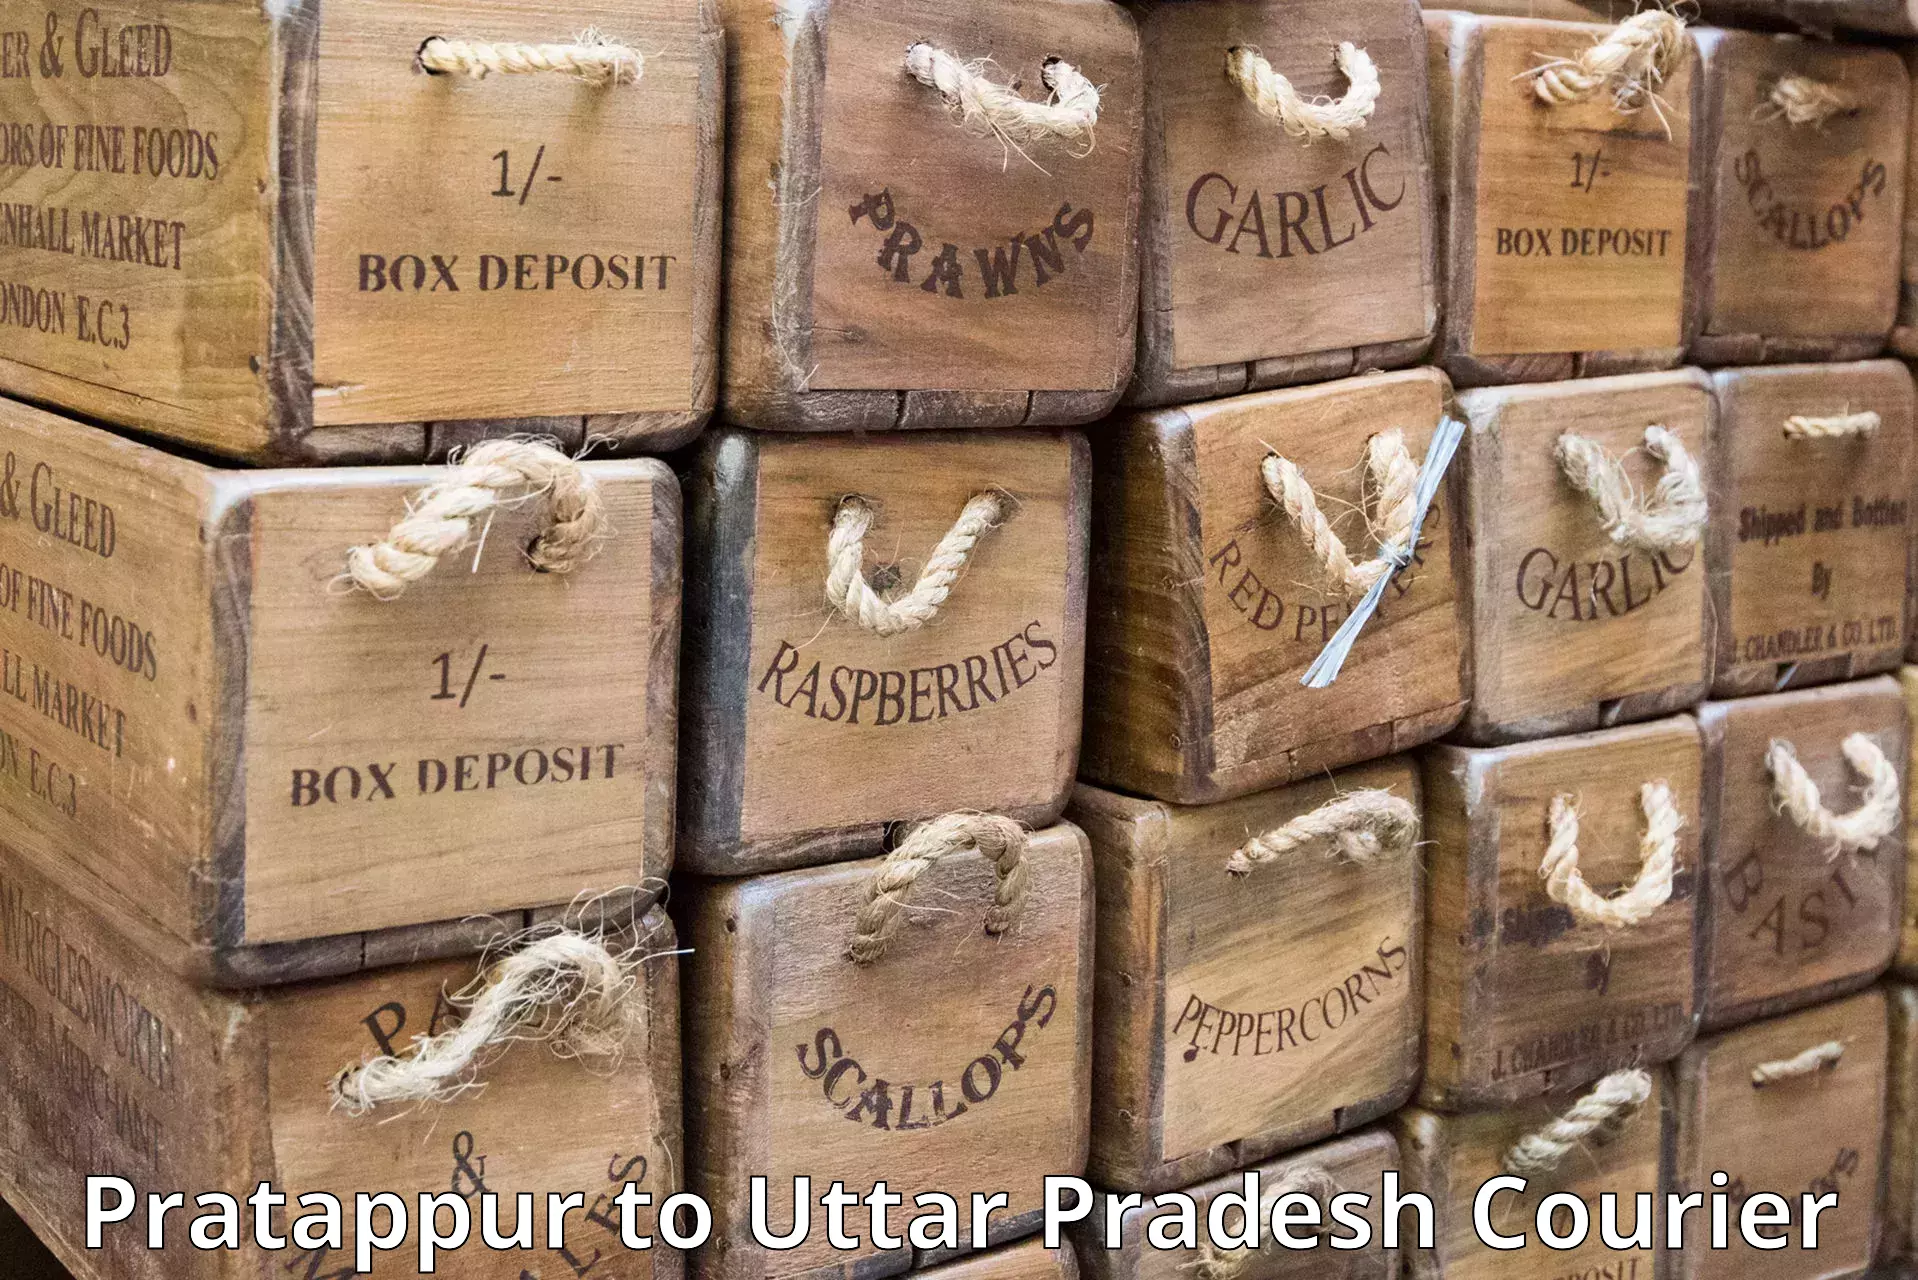 Multi-national courier services Pratappur to Shahabad